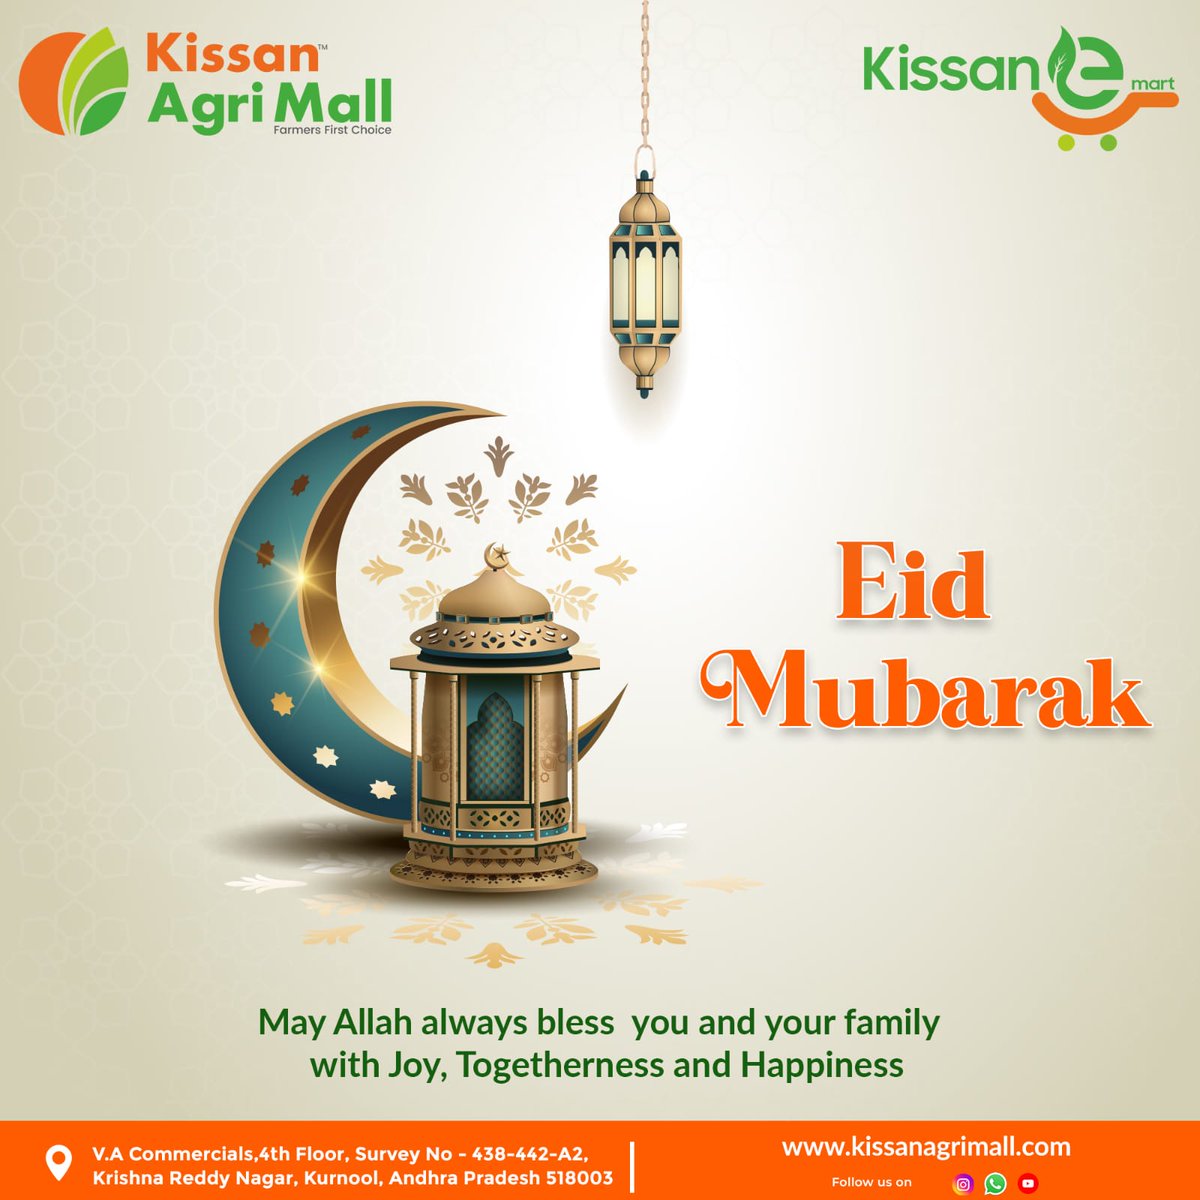 🌙✨ Eid Mubarak! As the crescent moon ushers in this joyous occasion, we at Kissan Agri Mall extend our warmest greetings to you and your loved ones. #EidMubarak from our family to yours! 🌾🤗

#KissanAgriMall #HappyEid #Eid2024 #BlessedEid #EidCelebration #HarvestJoy